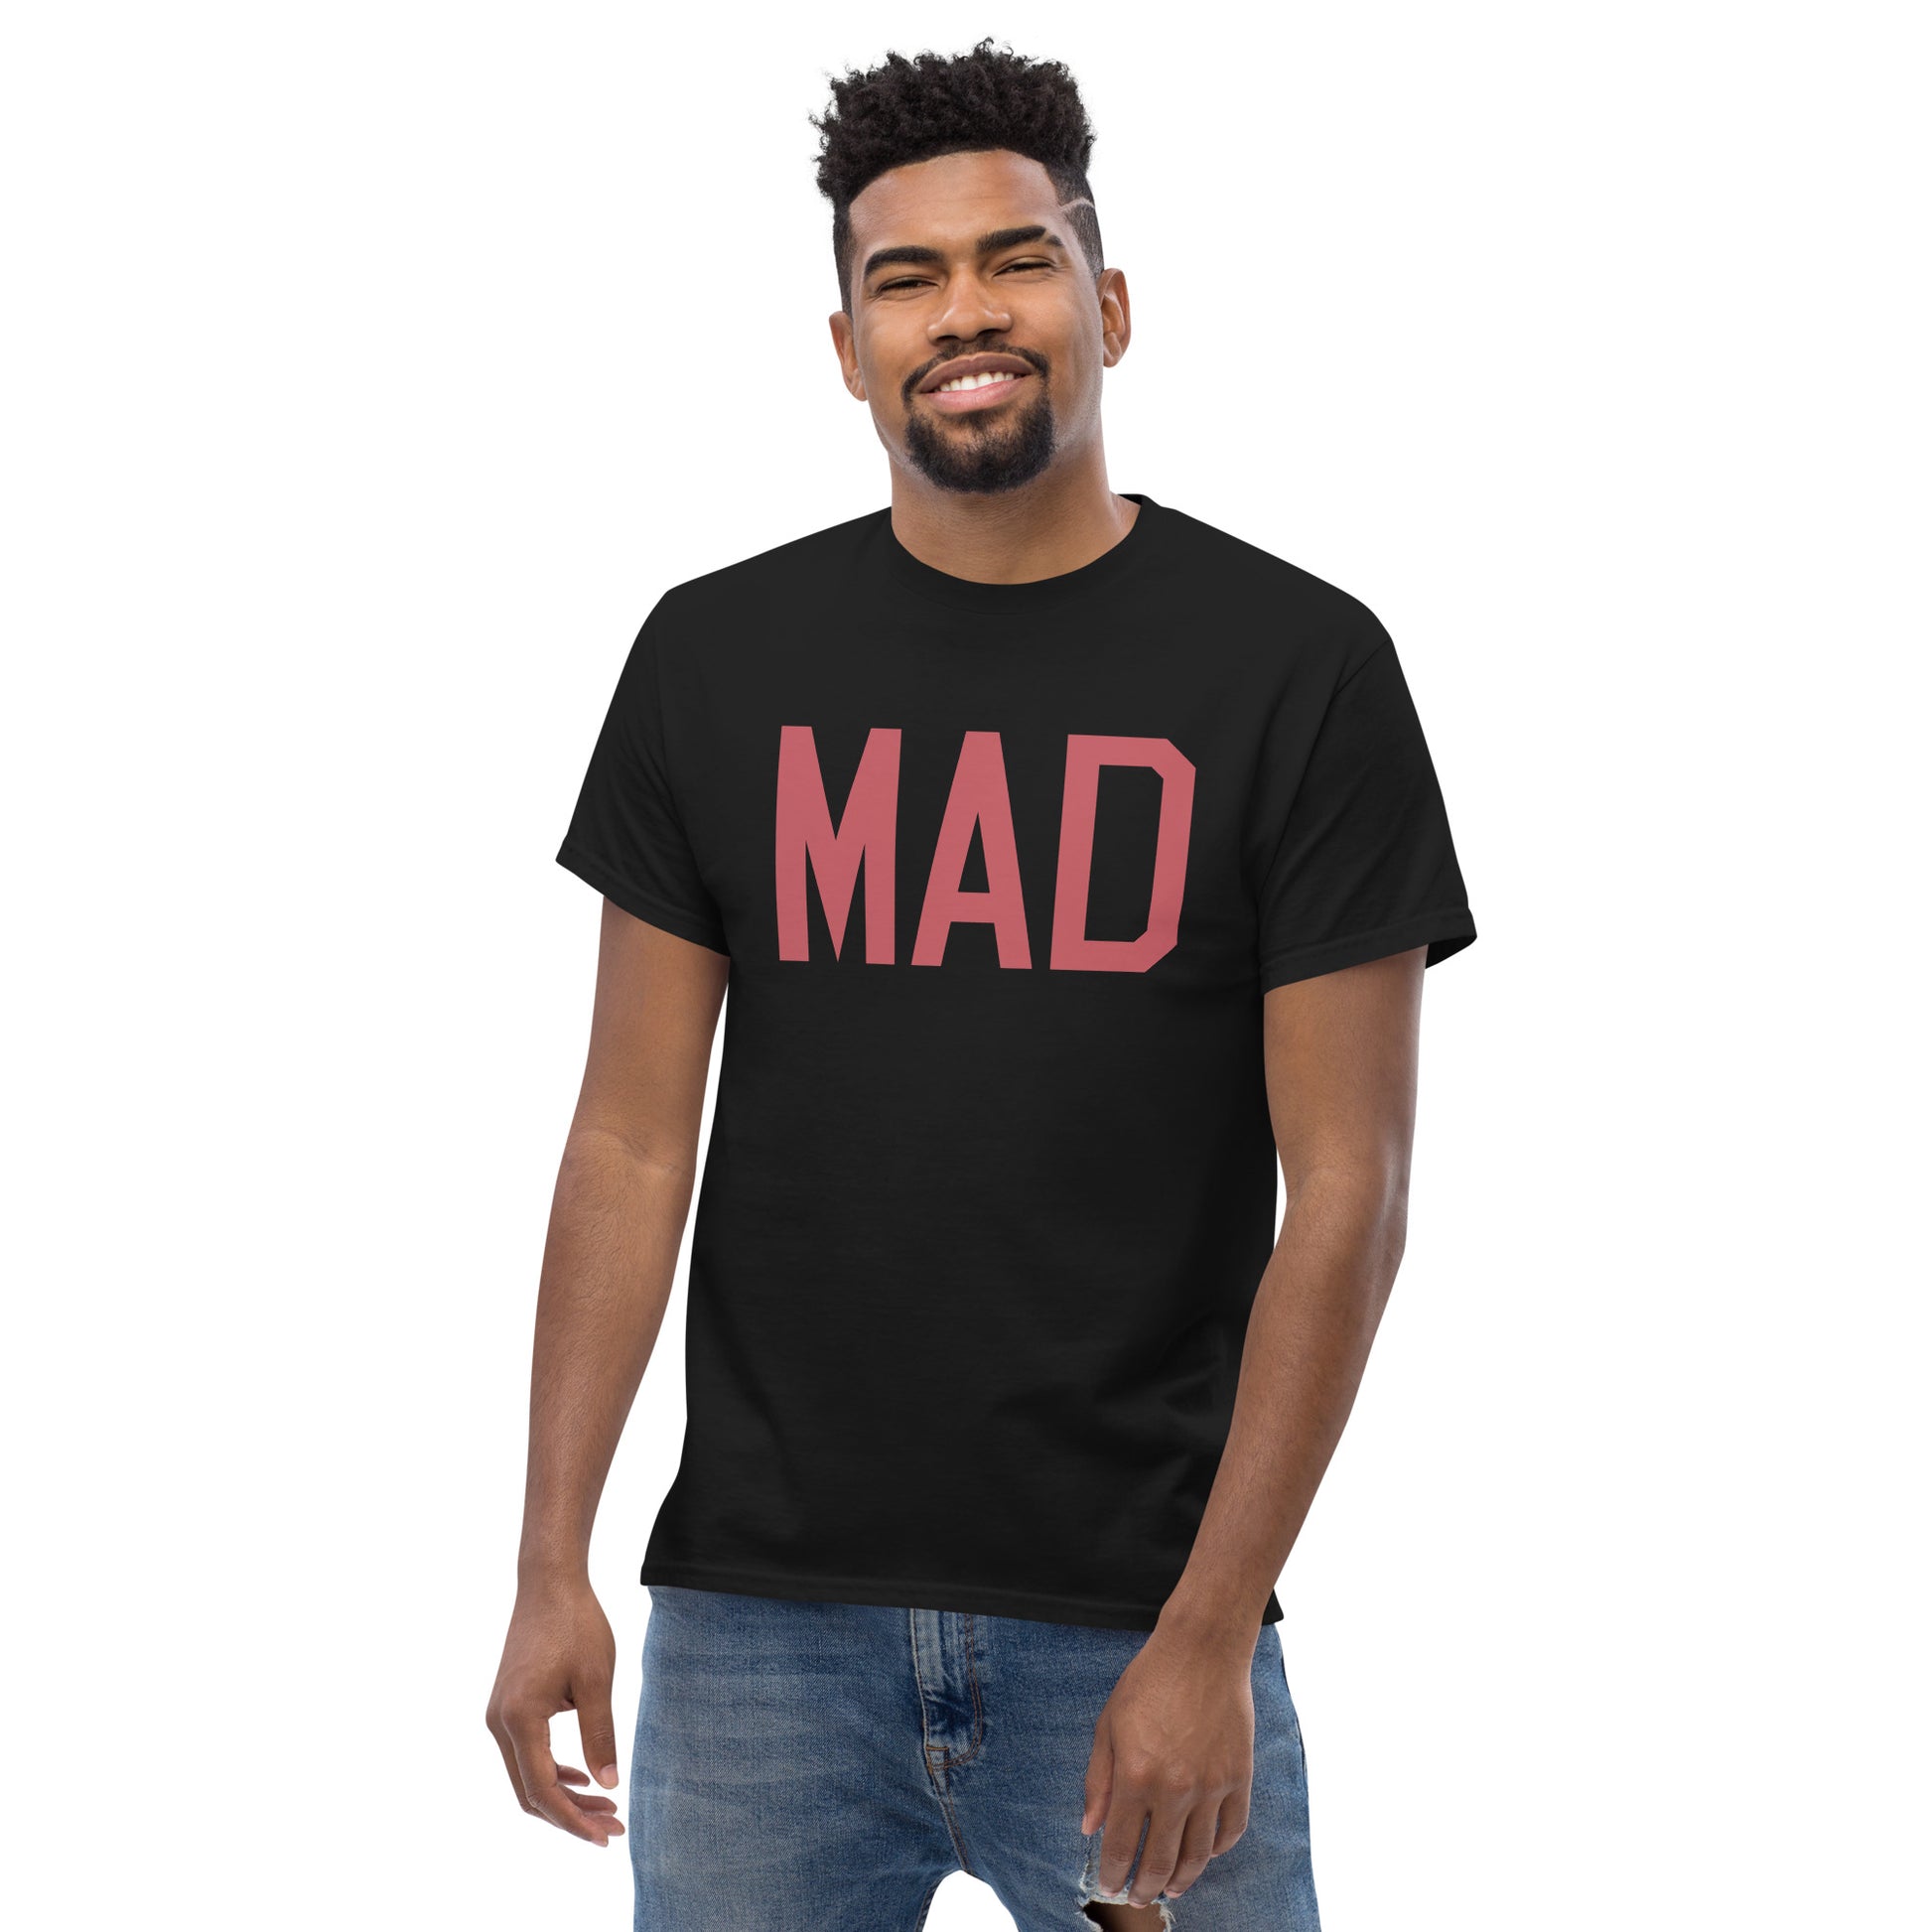 Aviation Enthusiast Men's Tee - Deep Pink Graphic • MAD Madrid • YHM Designs - Image 06